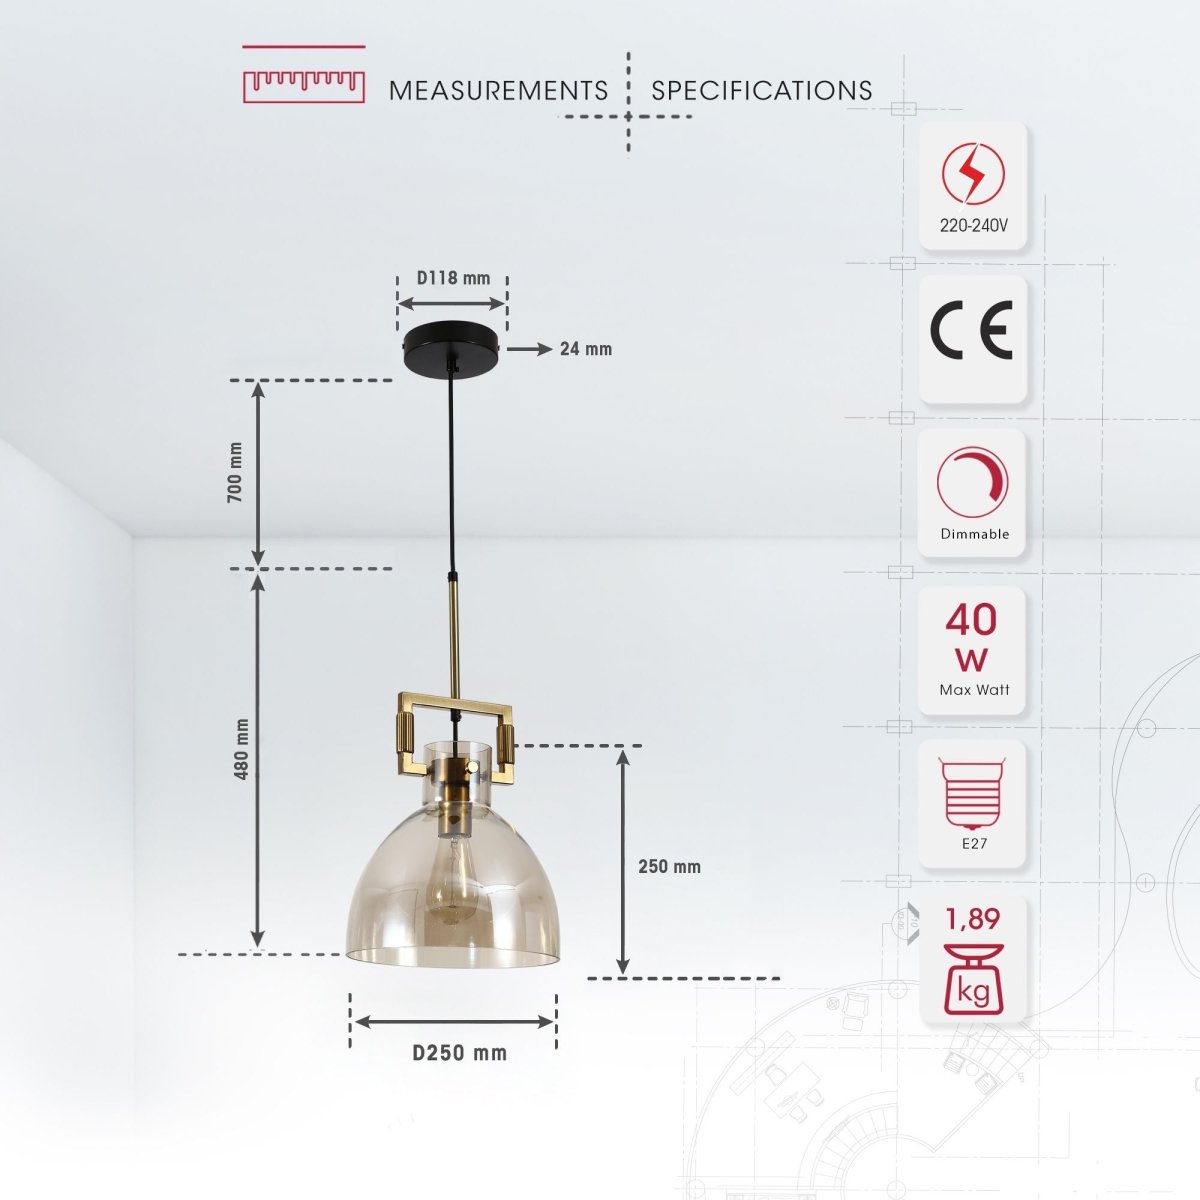 Product dimensions of golden bronze metal amber glass dome pendant light with e27 fitting